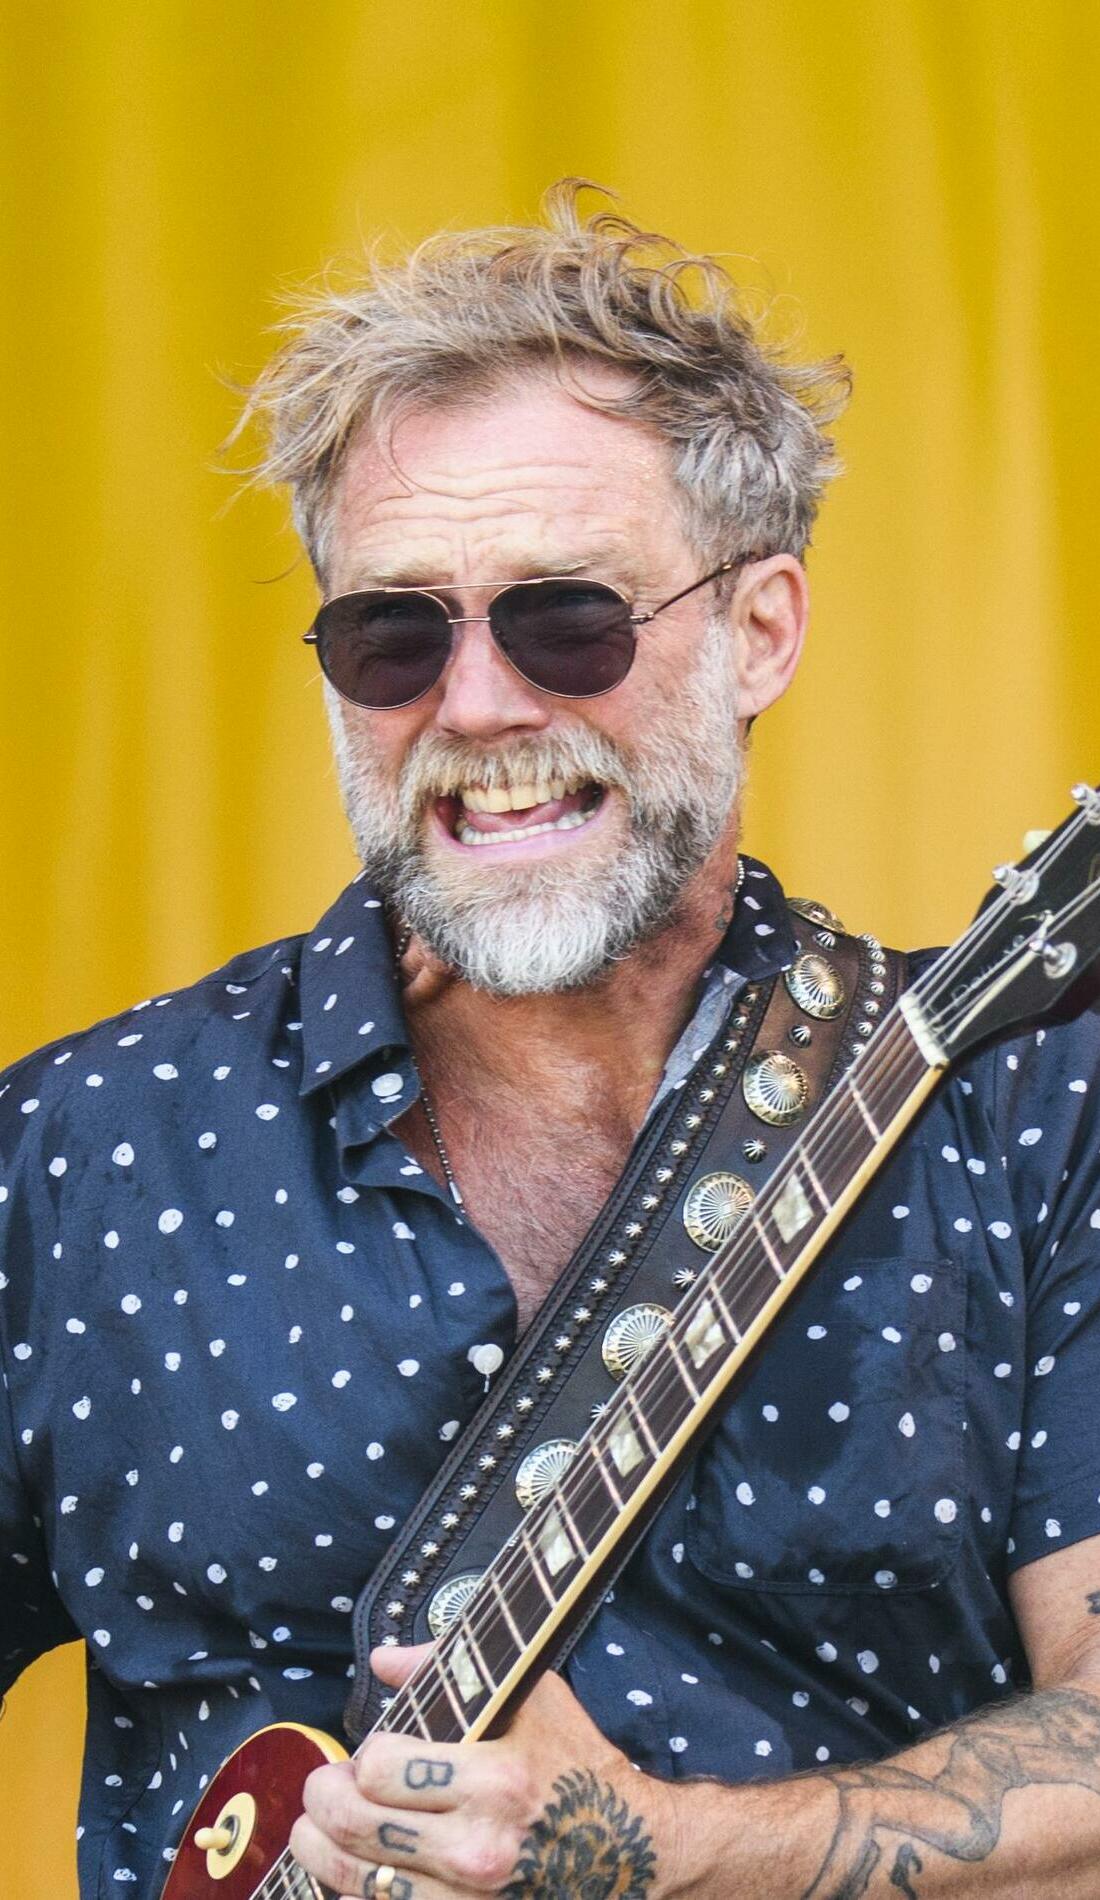 A Anders Osborne live event